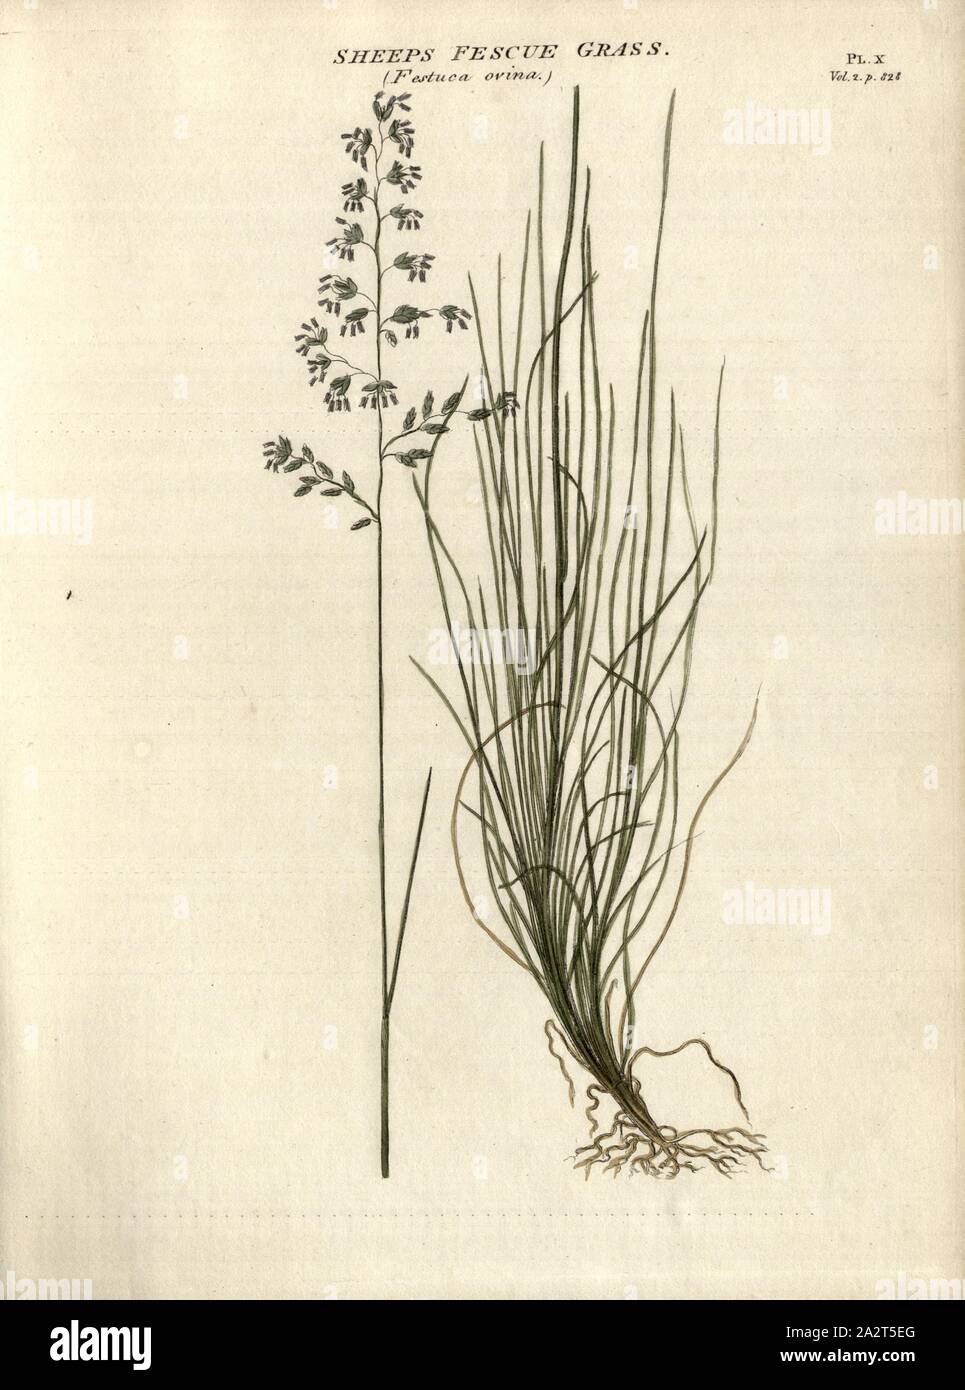 Sheeps Fescue Grass (Festuca ovina), Real sheep's fescue, Fig. 10, Pl. X, after p. 828, R.W. Dickson: Practical agriculture, or, a complete system of modern husbandry: with the methods of planting, and the management of live stock. Bd. 2. London: printed for Richard Phillips; by R. Taylor and Co., 1805 Stock Photo